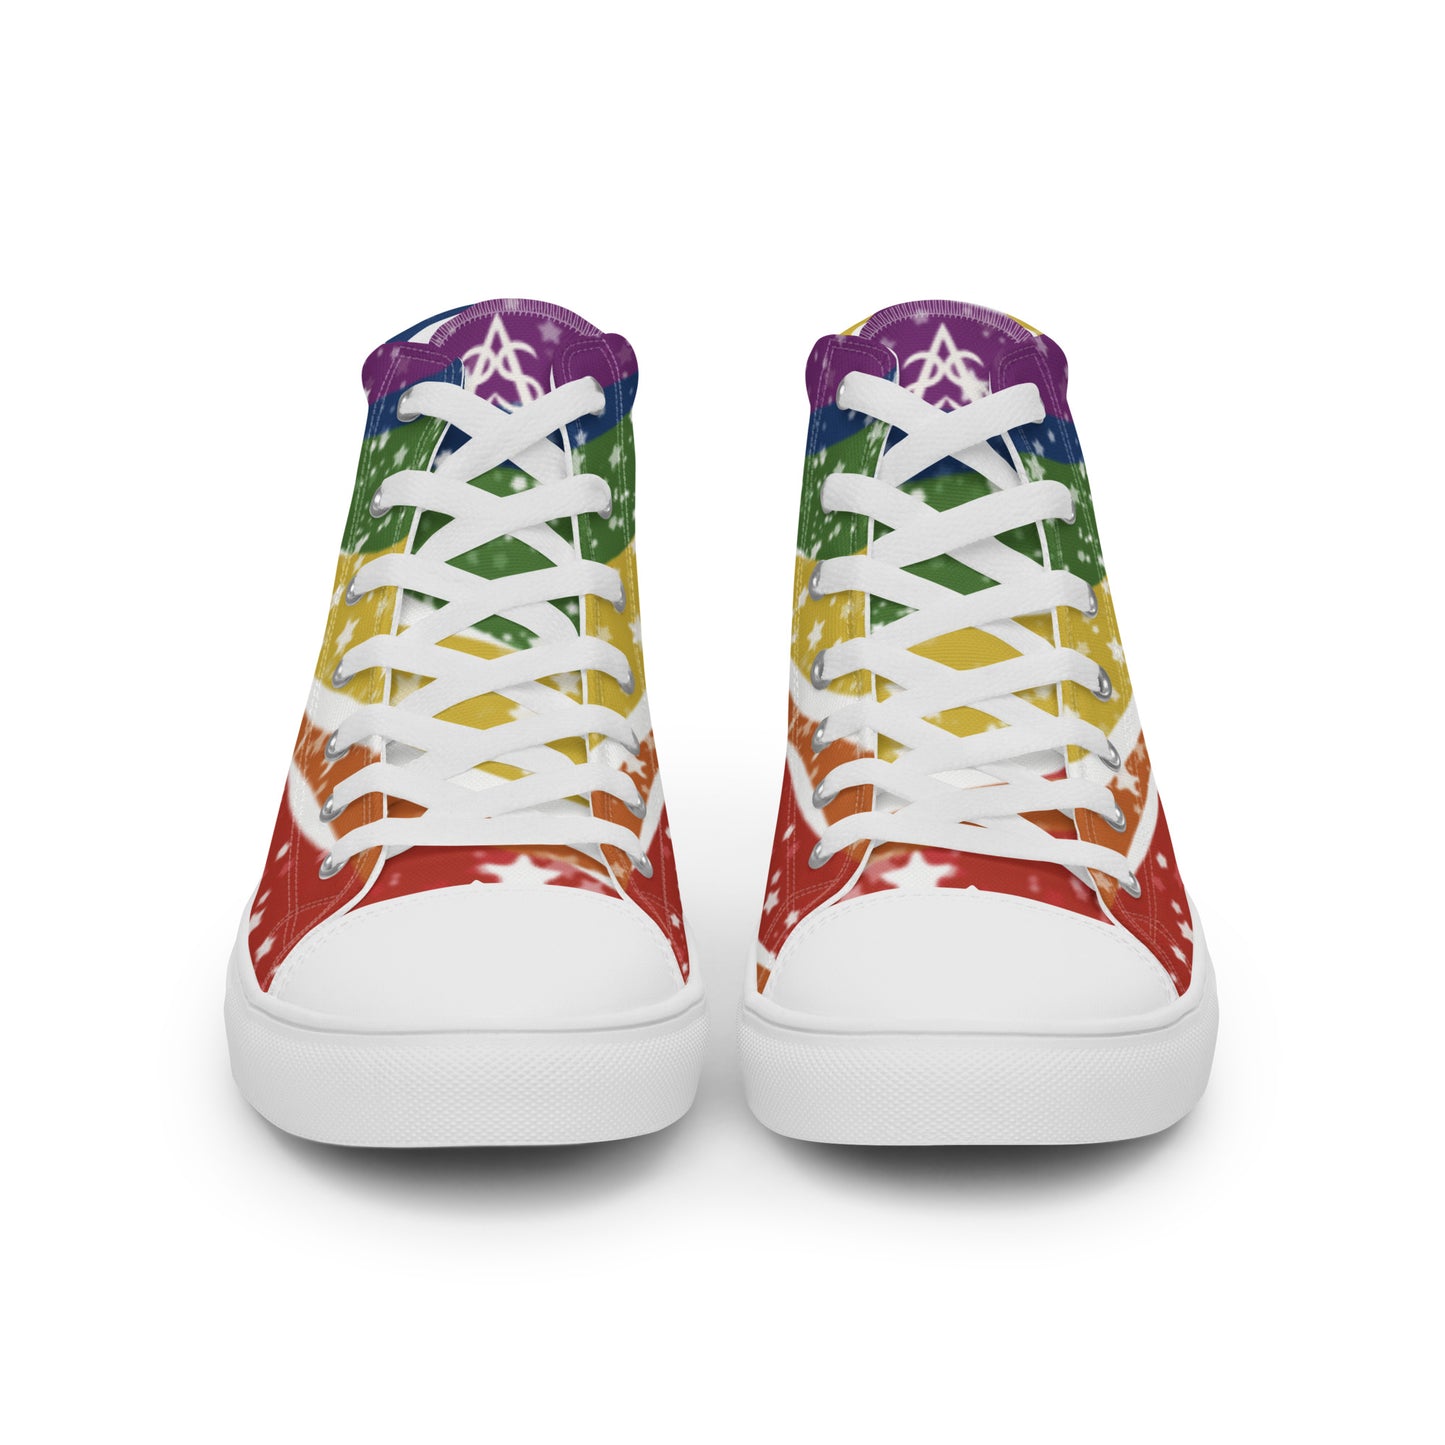 Front view: A pair of high top shoes have wavy rainbow stripes coming from the heel and getting wider towards the laces, covered in stars, with a double heart in black and brown containing the Trans Pride flag near the heel.